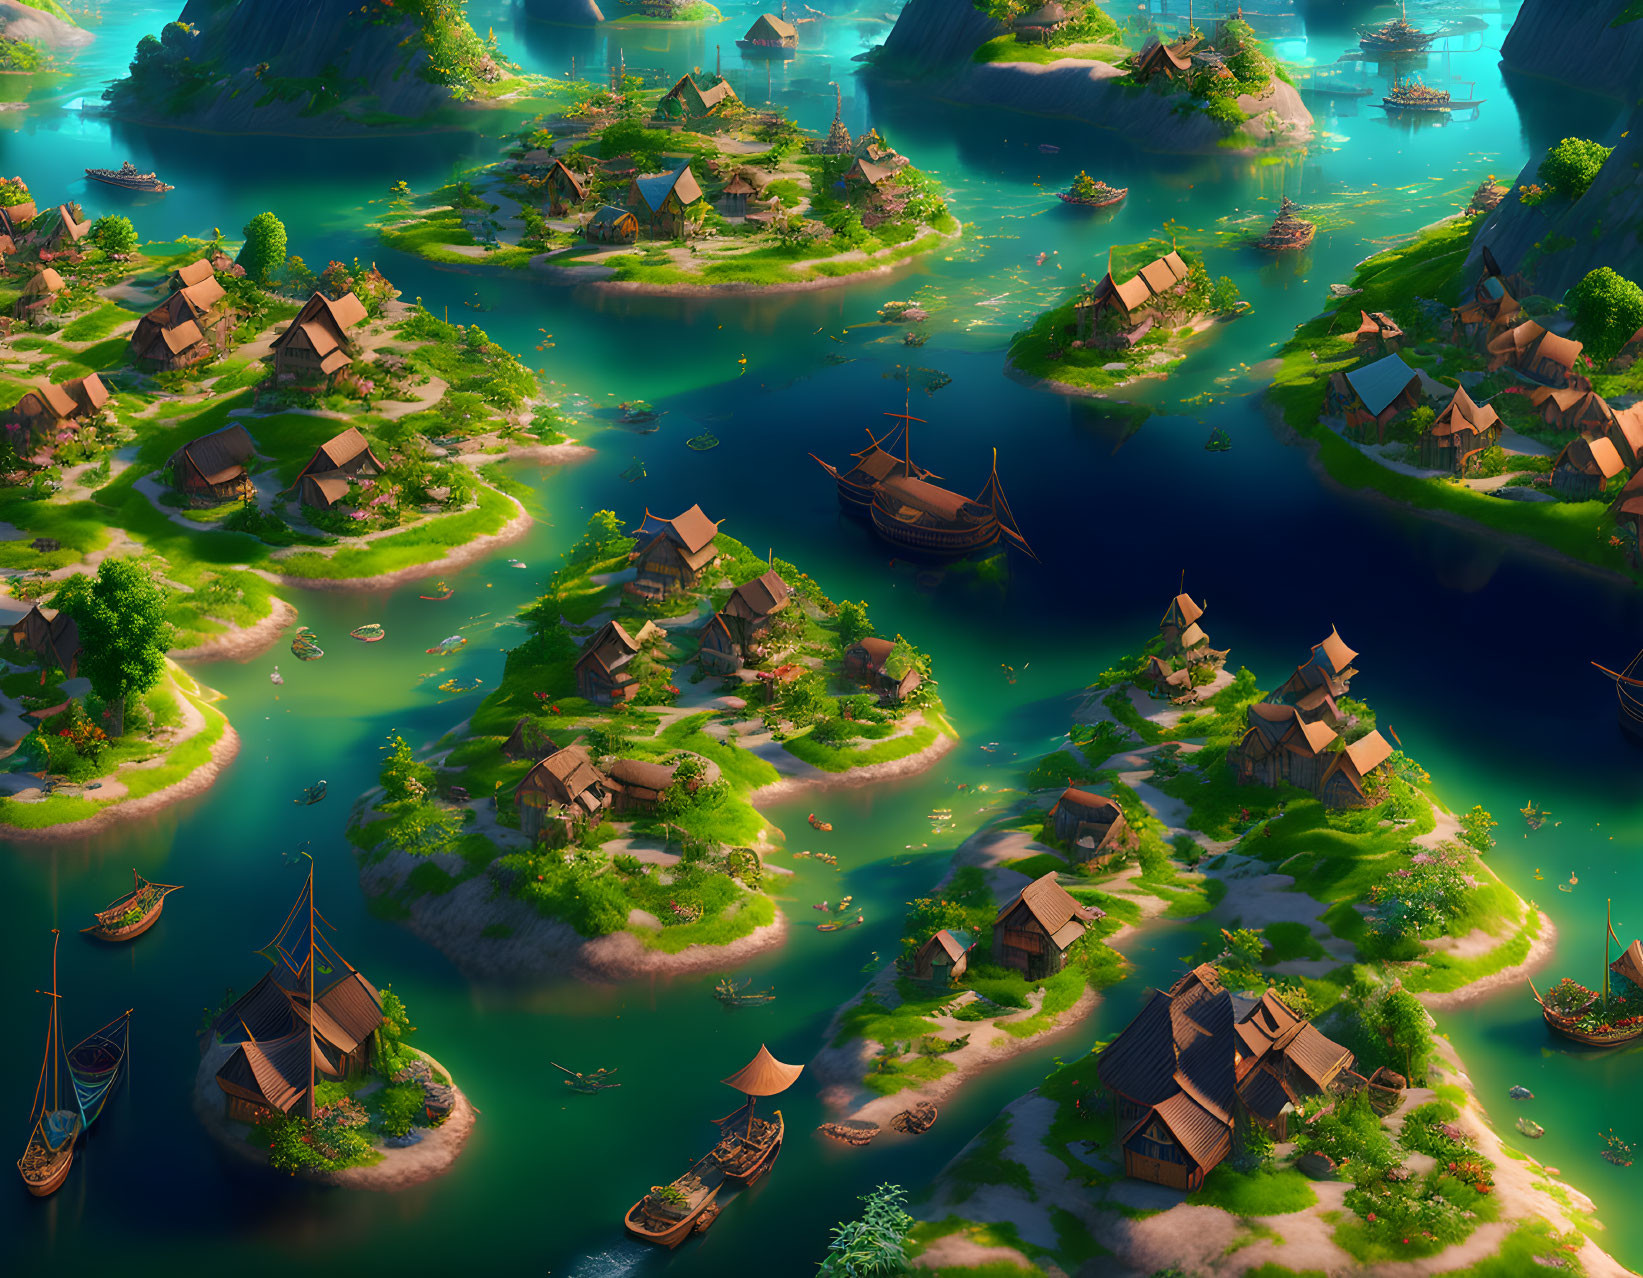 Colorful fantasy archipelago with thatched houses, waterways, and sailing ships